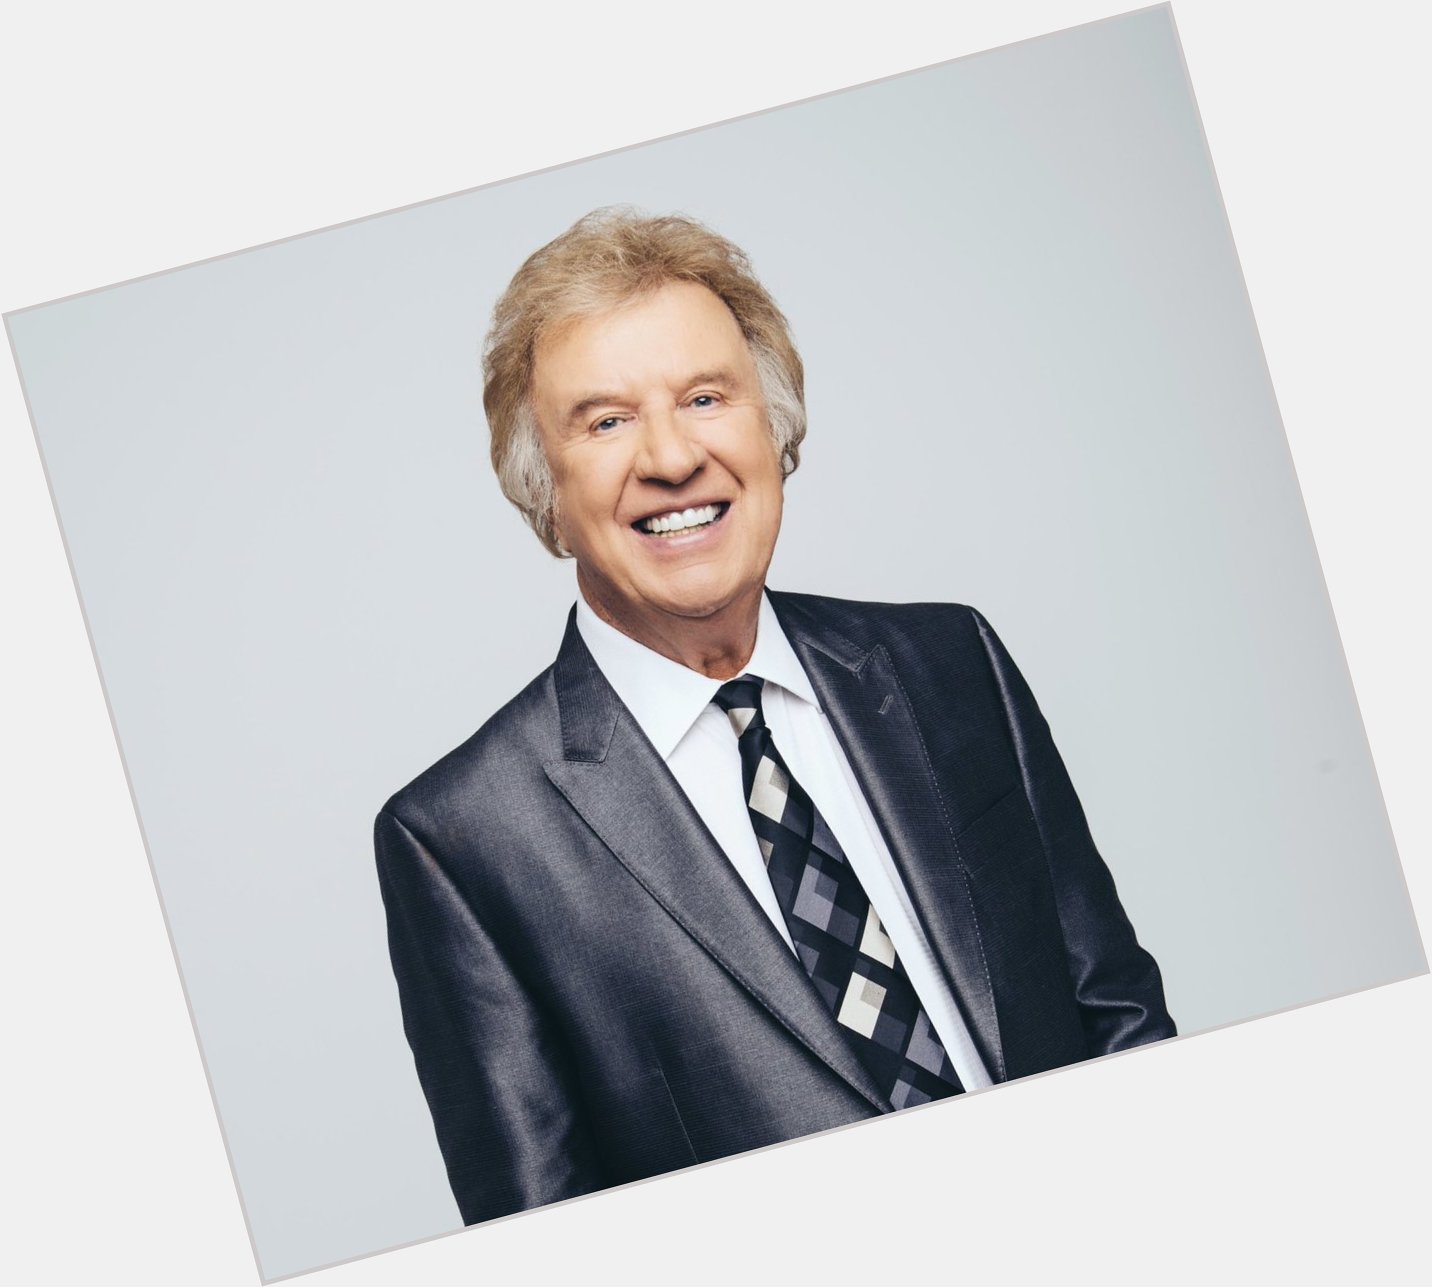  HAPPY BIRTHDAY, BILL! Help us wish Bill Gaither a happy 84th birthday in the comments below!  